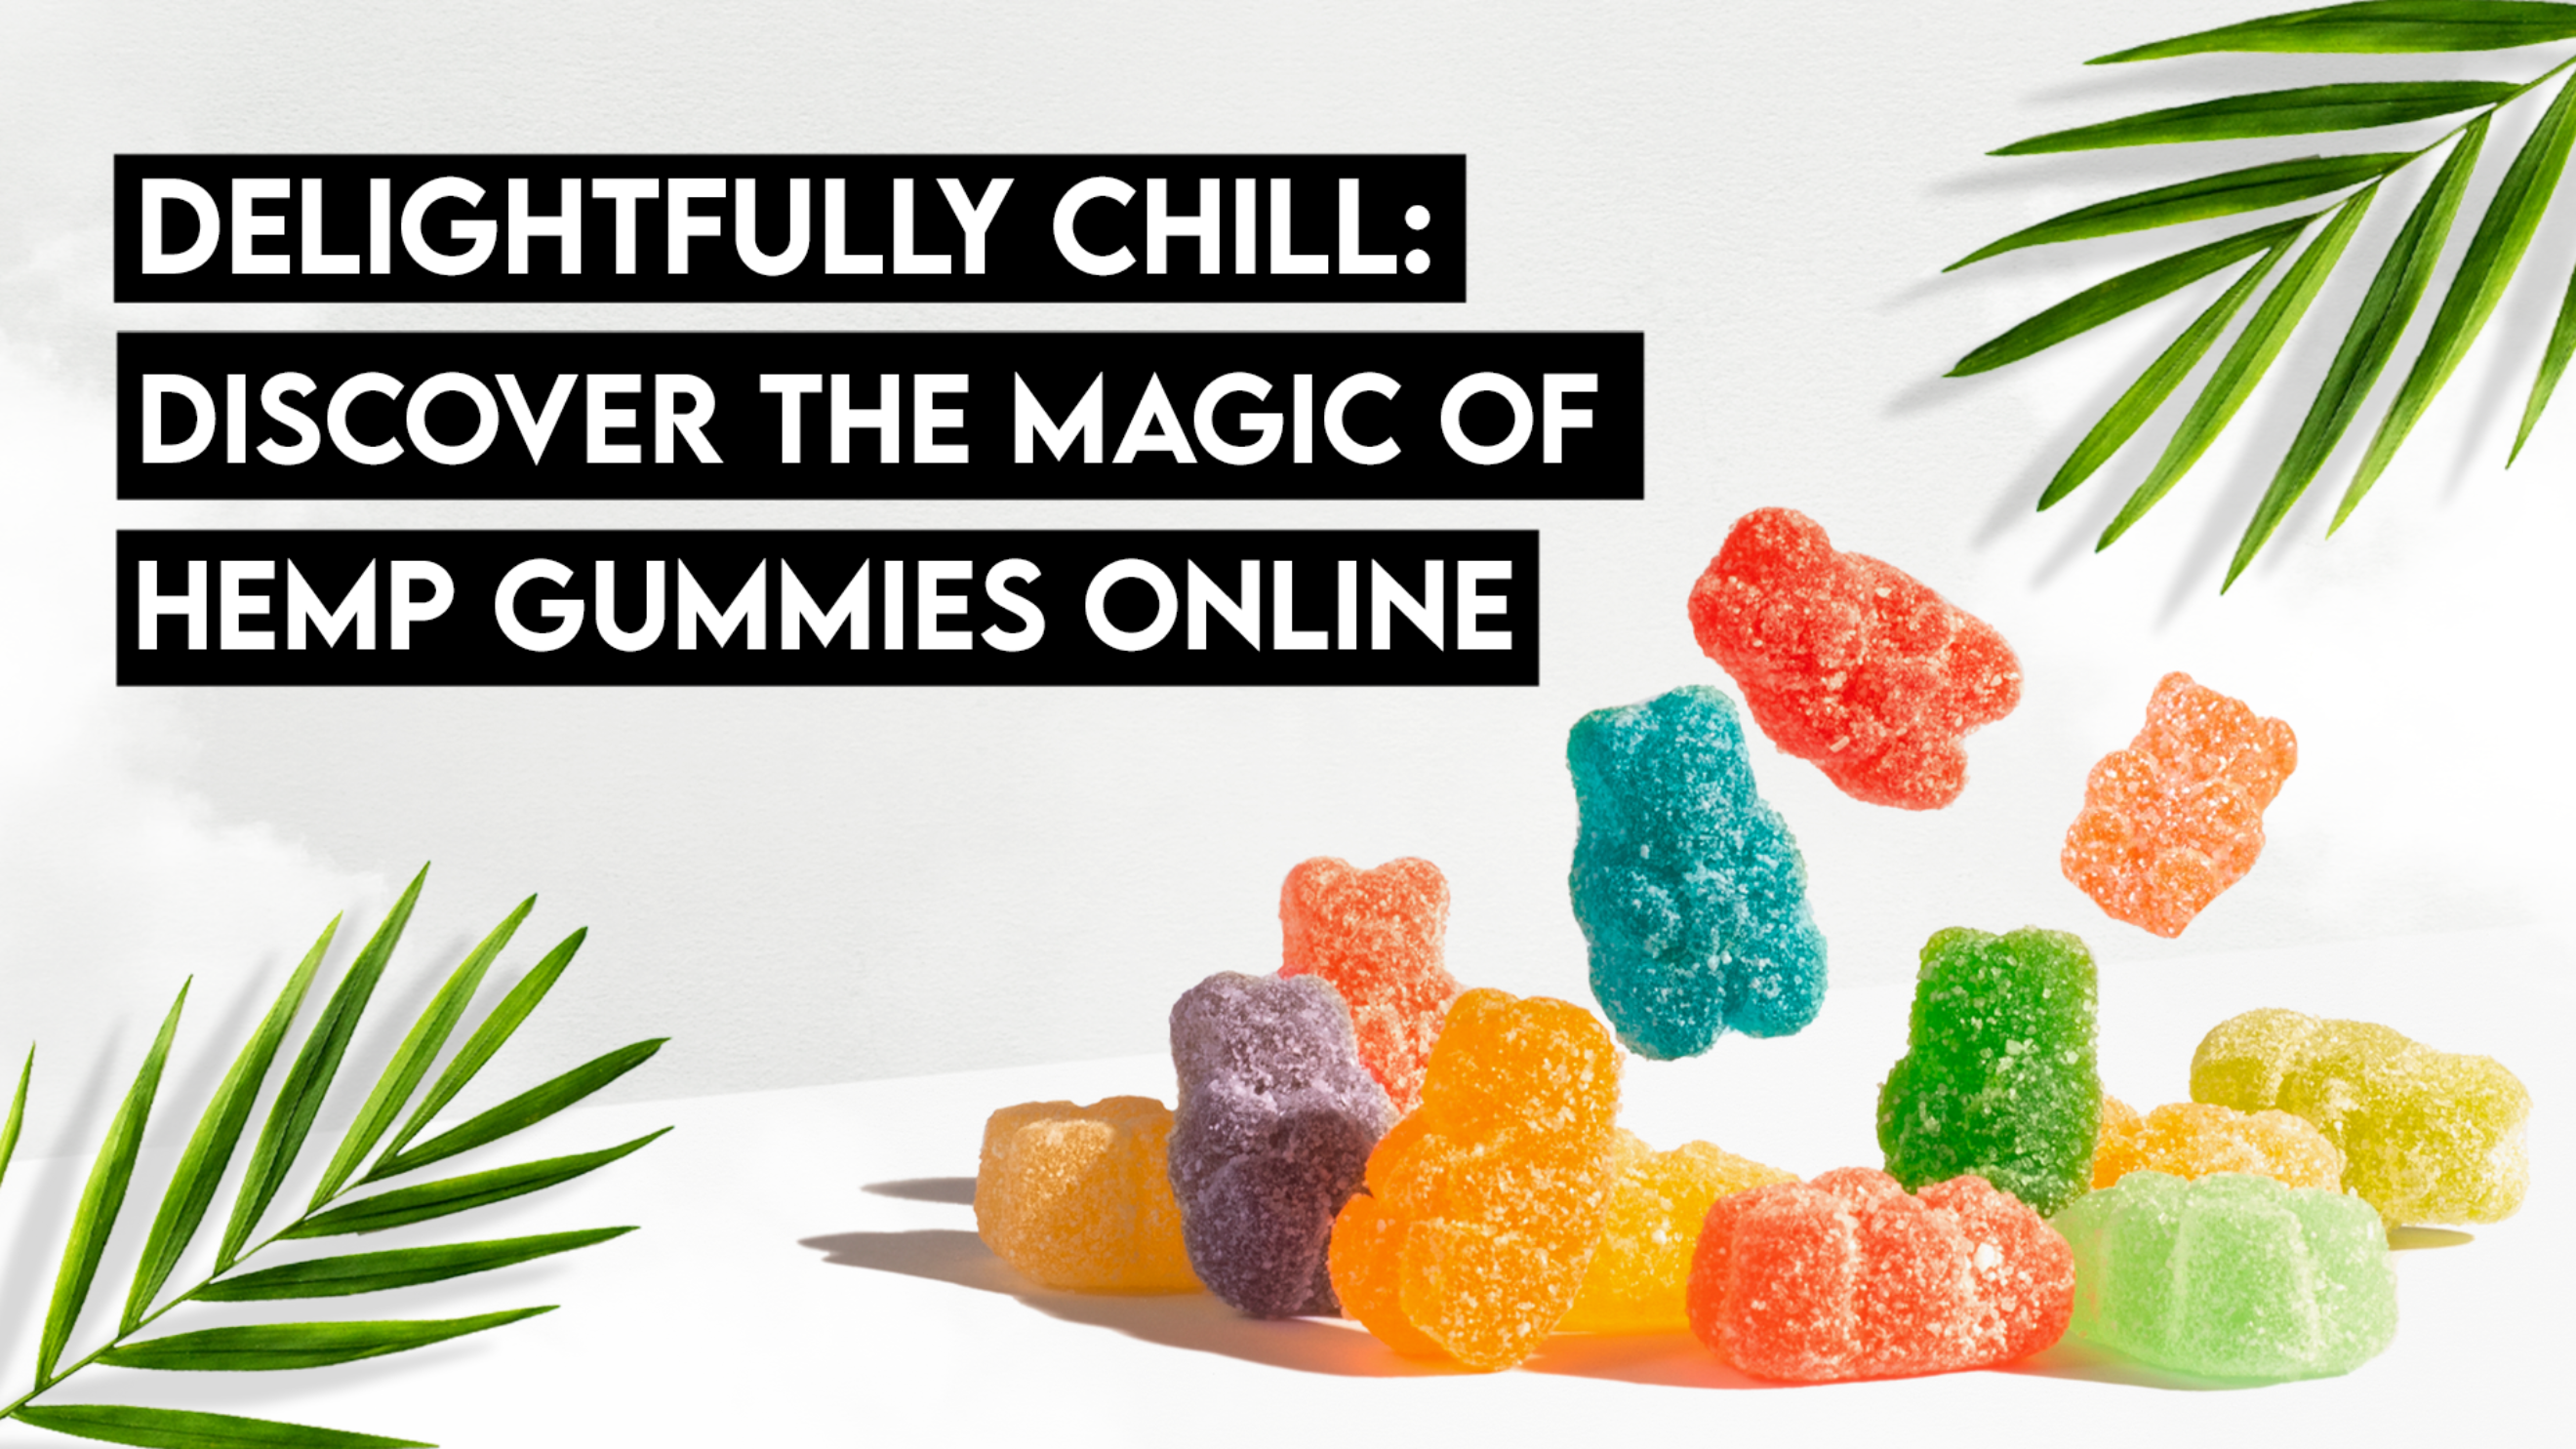 Delightfully Chill: Discover the Magic of Hemp Gummies Online